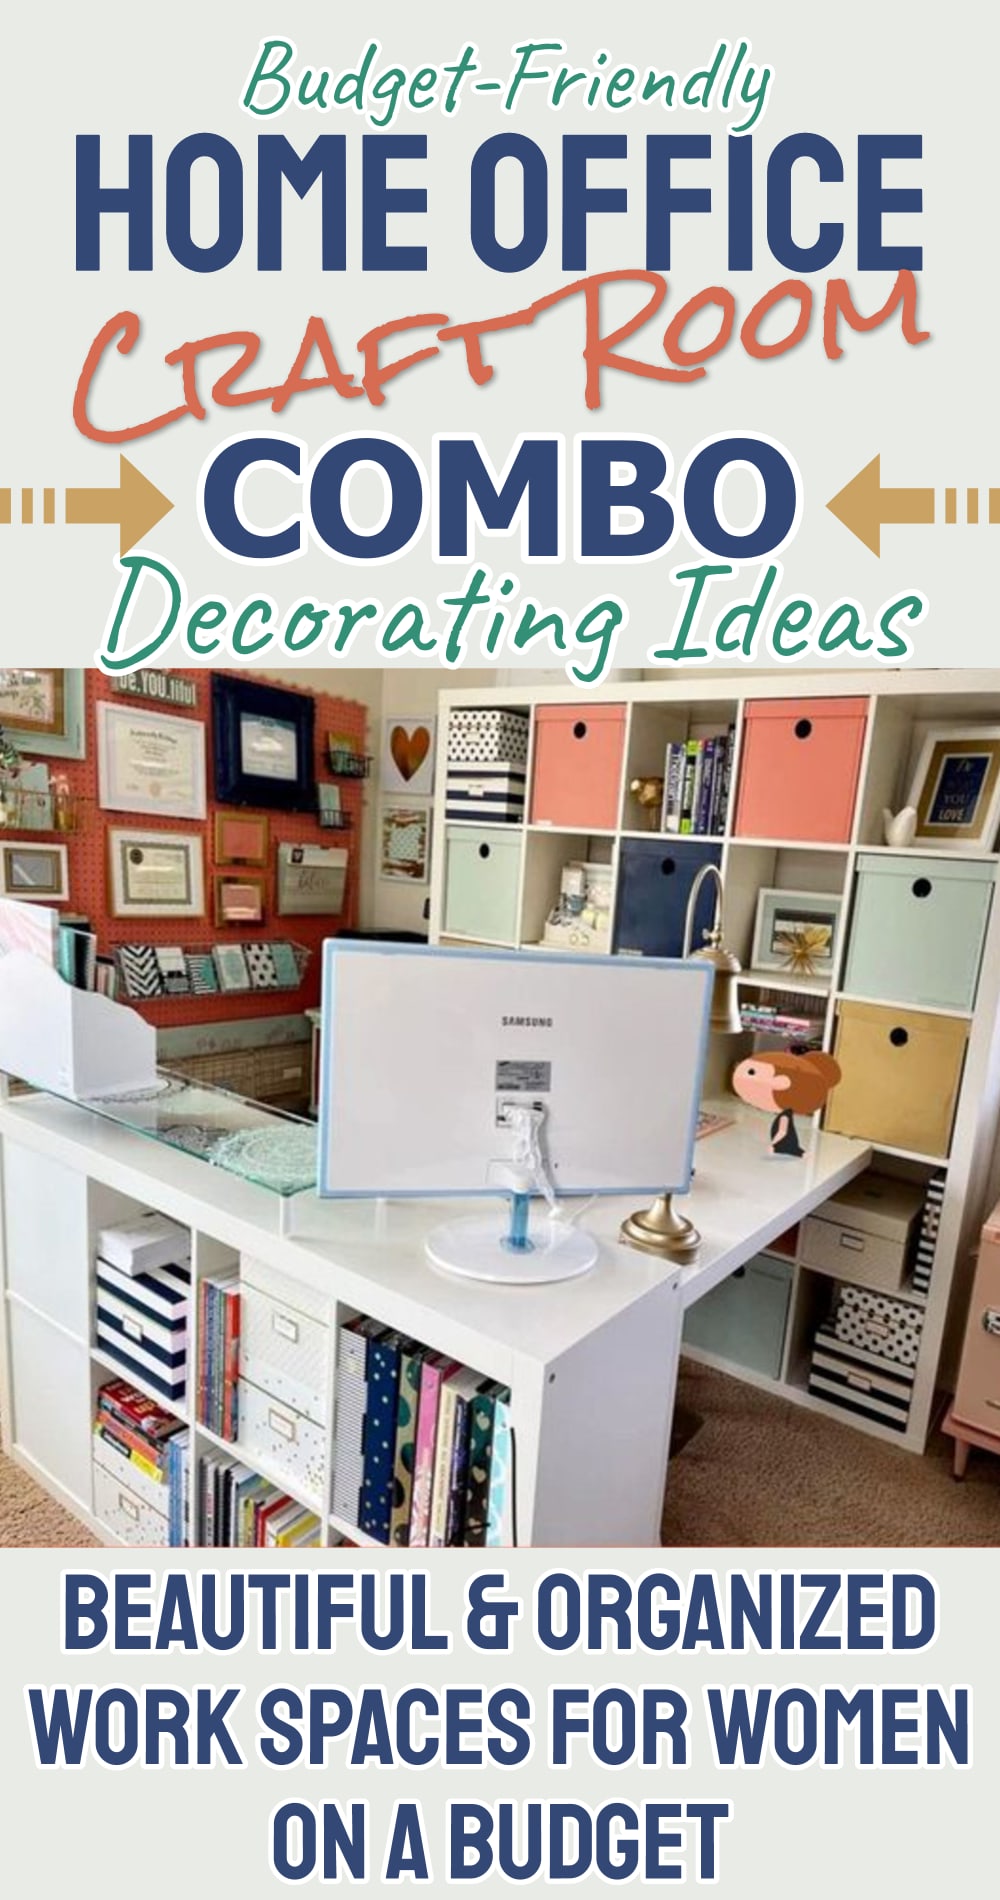 Home office craft room decorating ideas for a spare guest bedroom combo